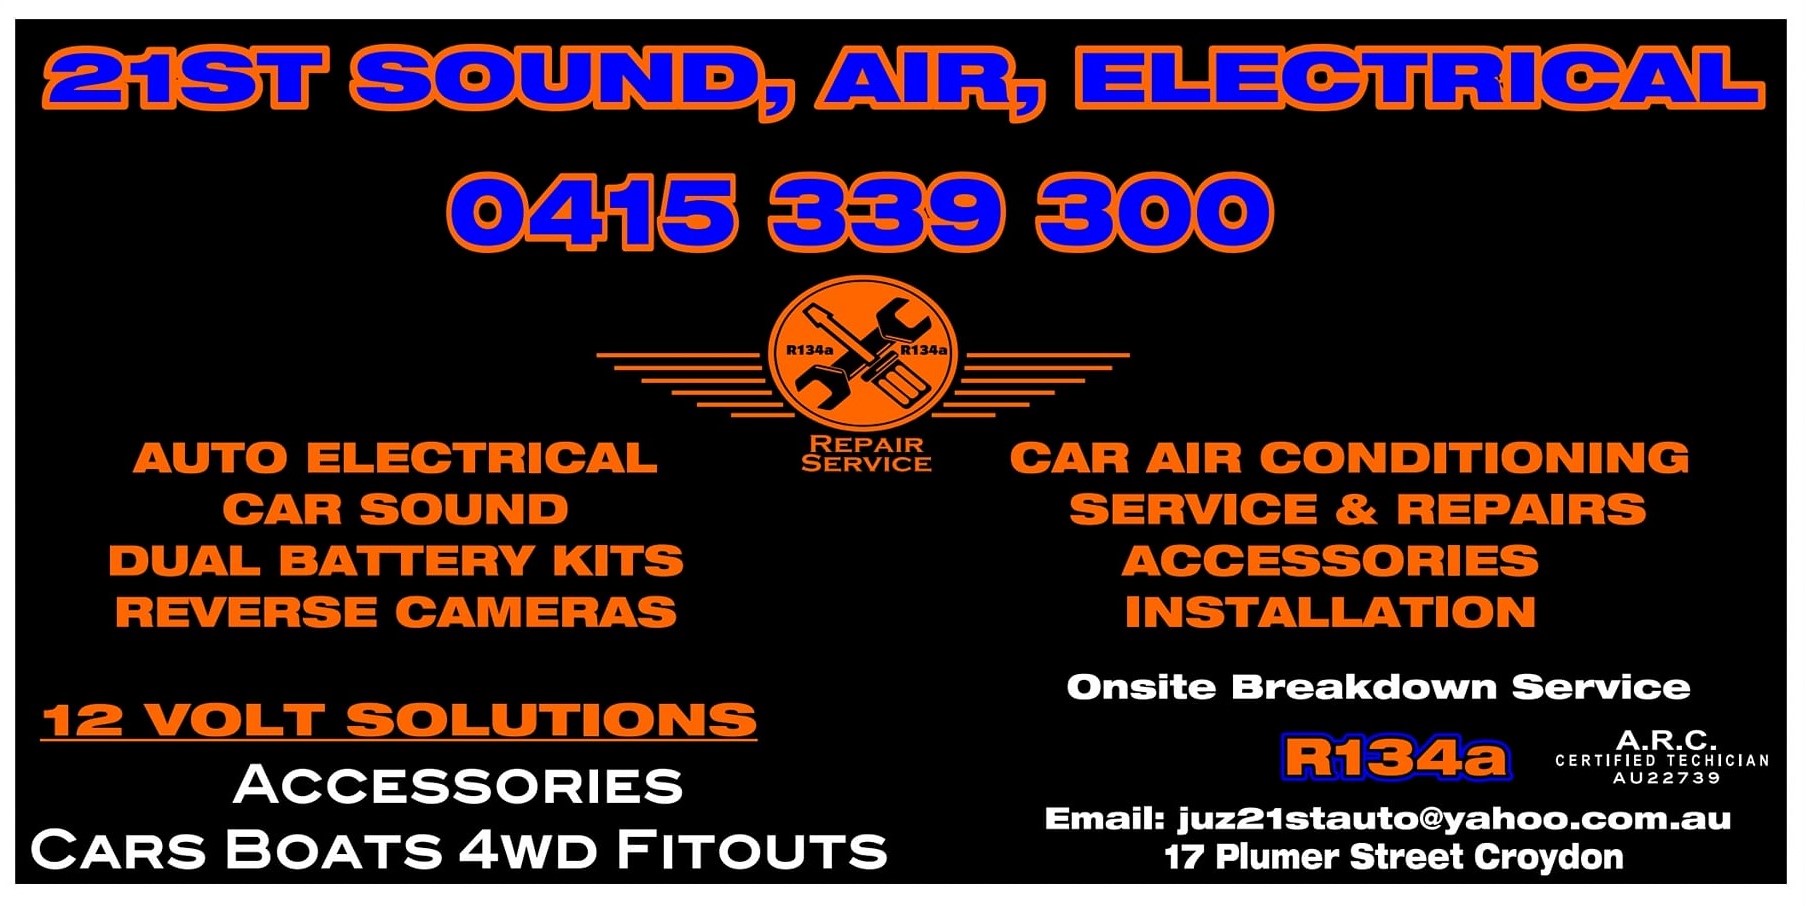 21st Sound, Air & Electrical